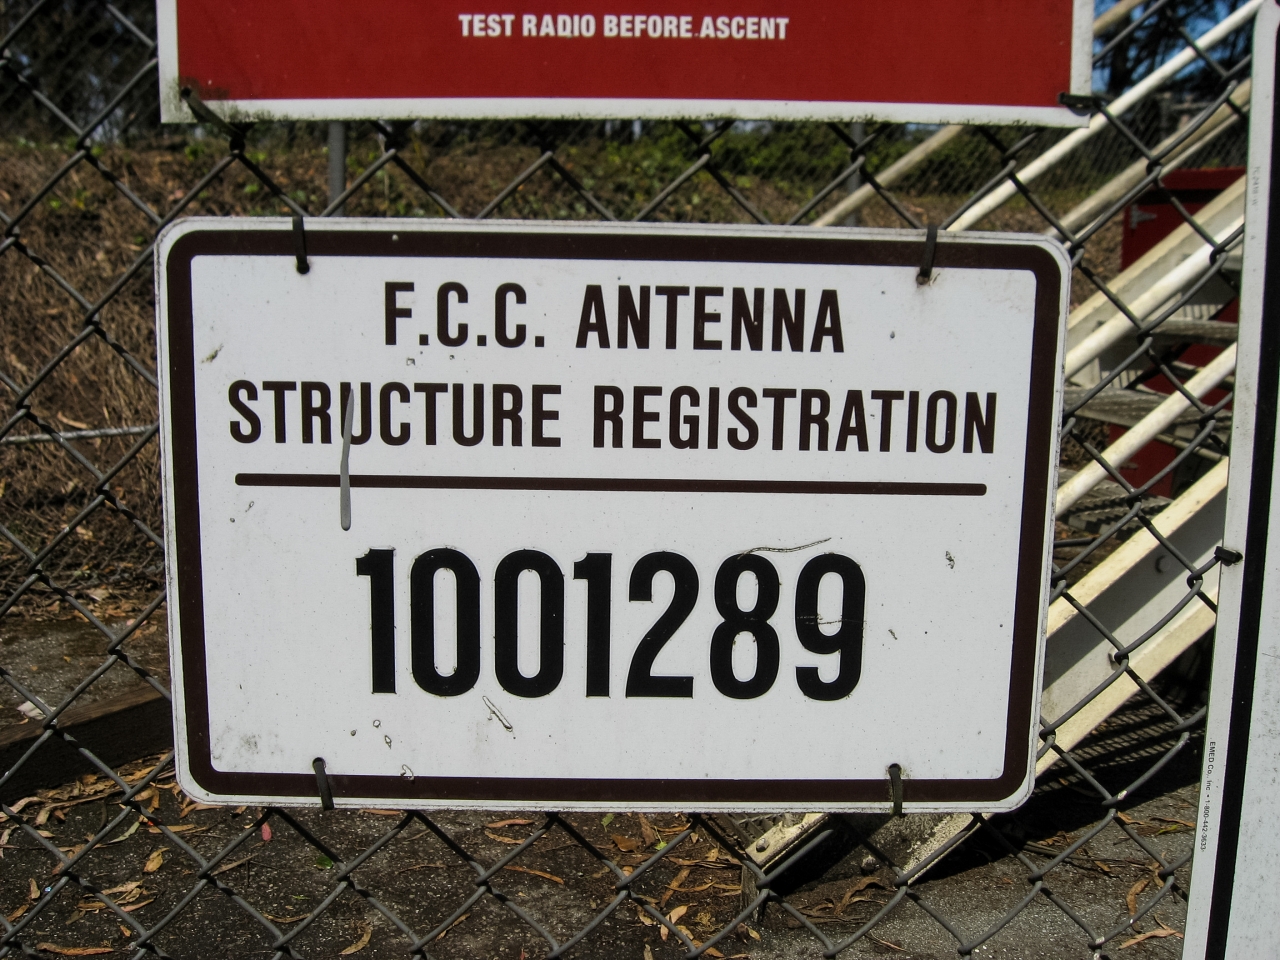 FCC ASR 1001289 sign just outside the Sutro Tower western leg and elevator.